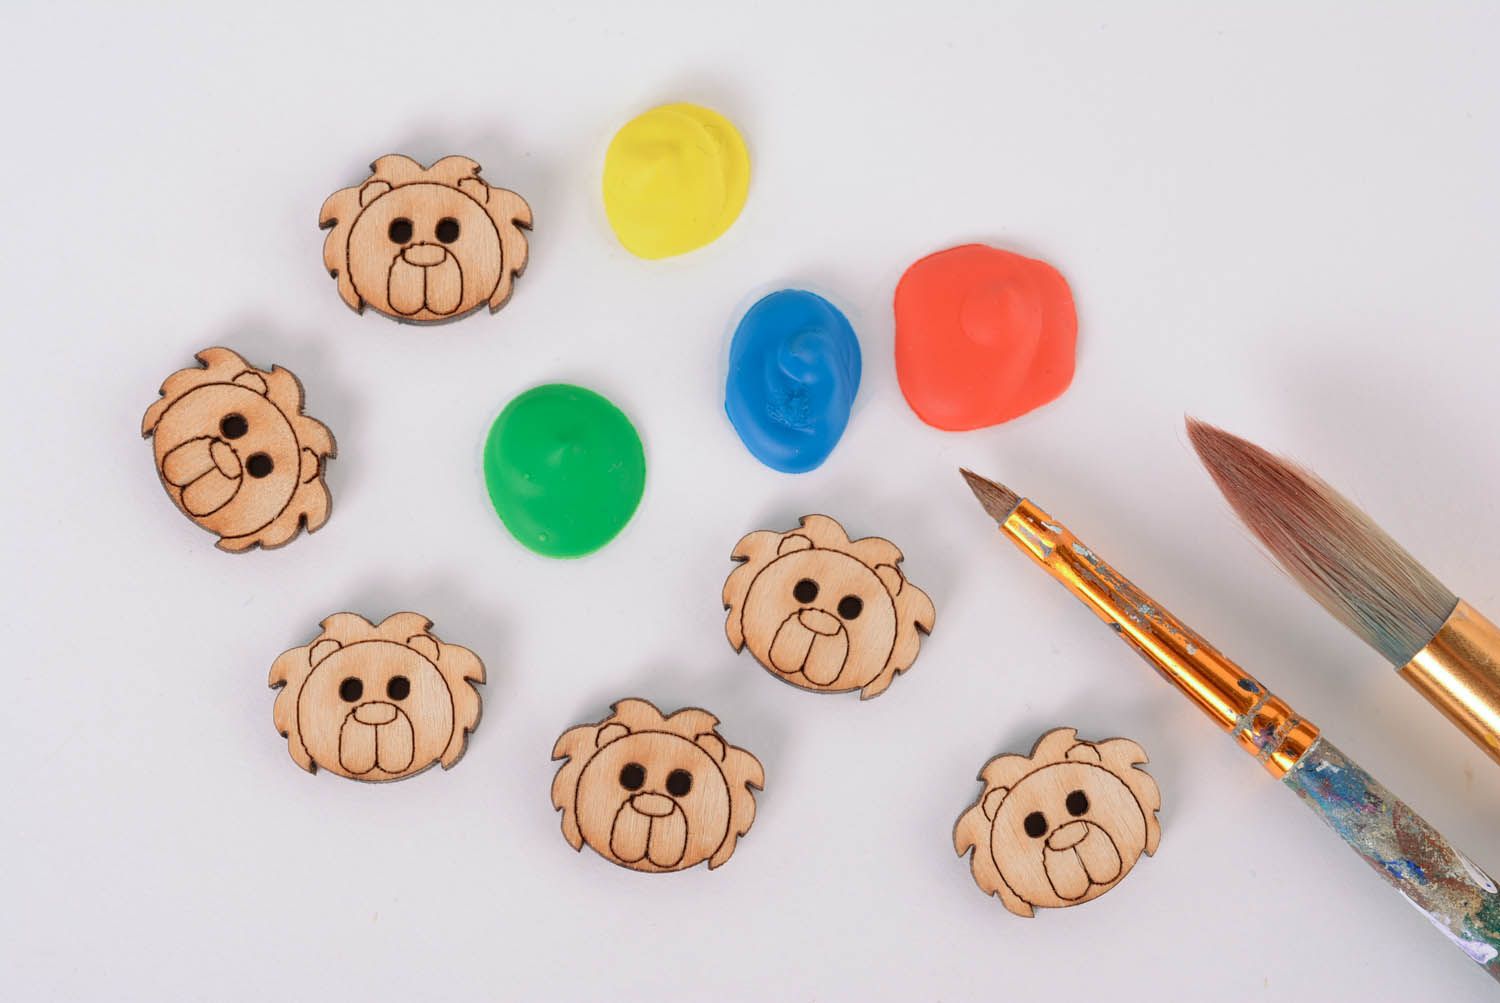 Blanks for creativity in the shape of lion buttons photo 1